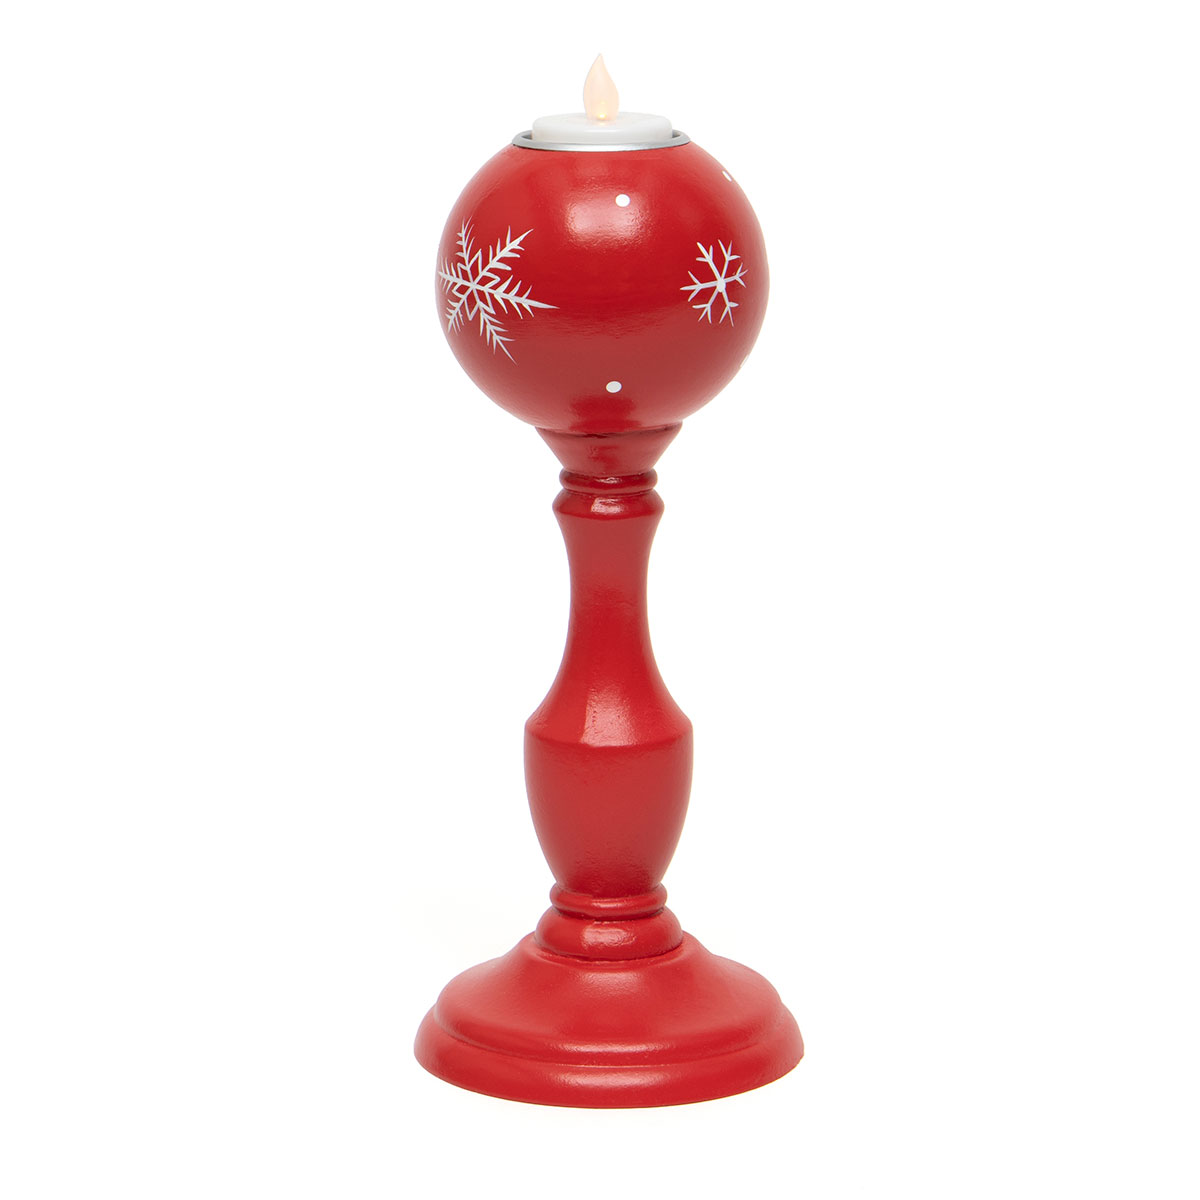 !SWEDISH BALL CANDLEHOLDER RED/WHITE WITH SNOWFLAKES